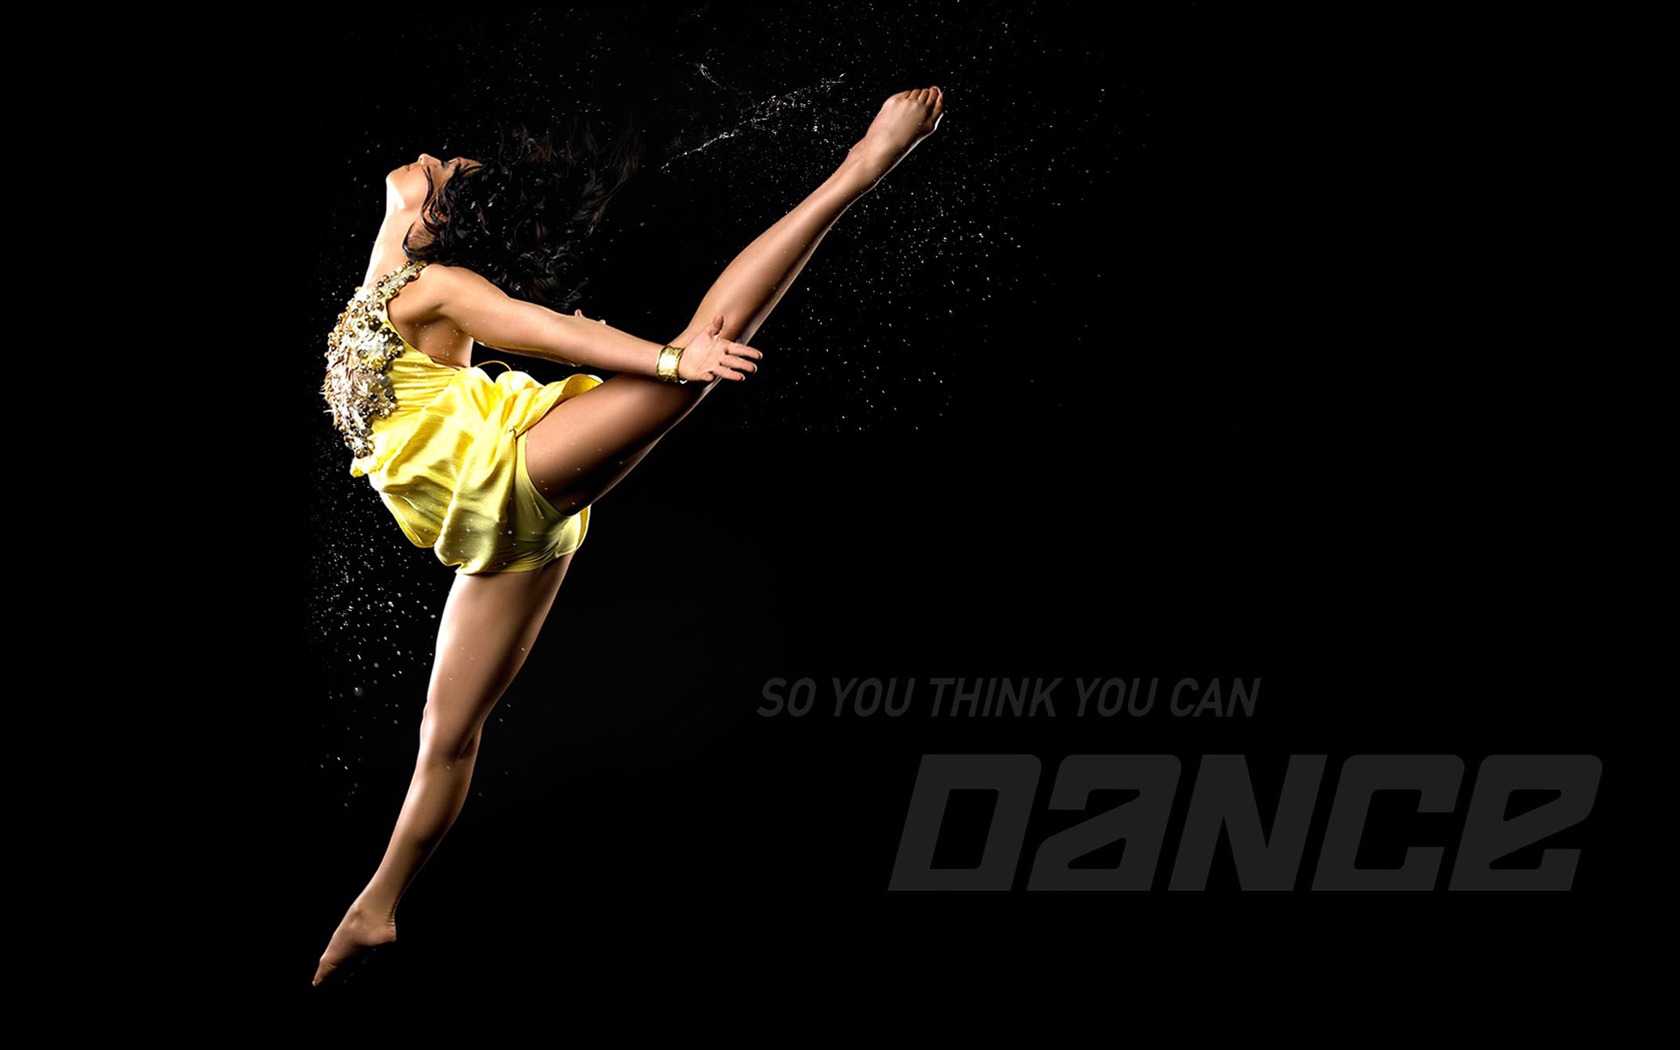 So You Think You Can Dance wallpaper (1) #19 - 1680x1050